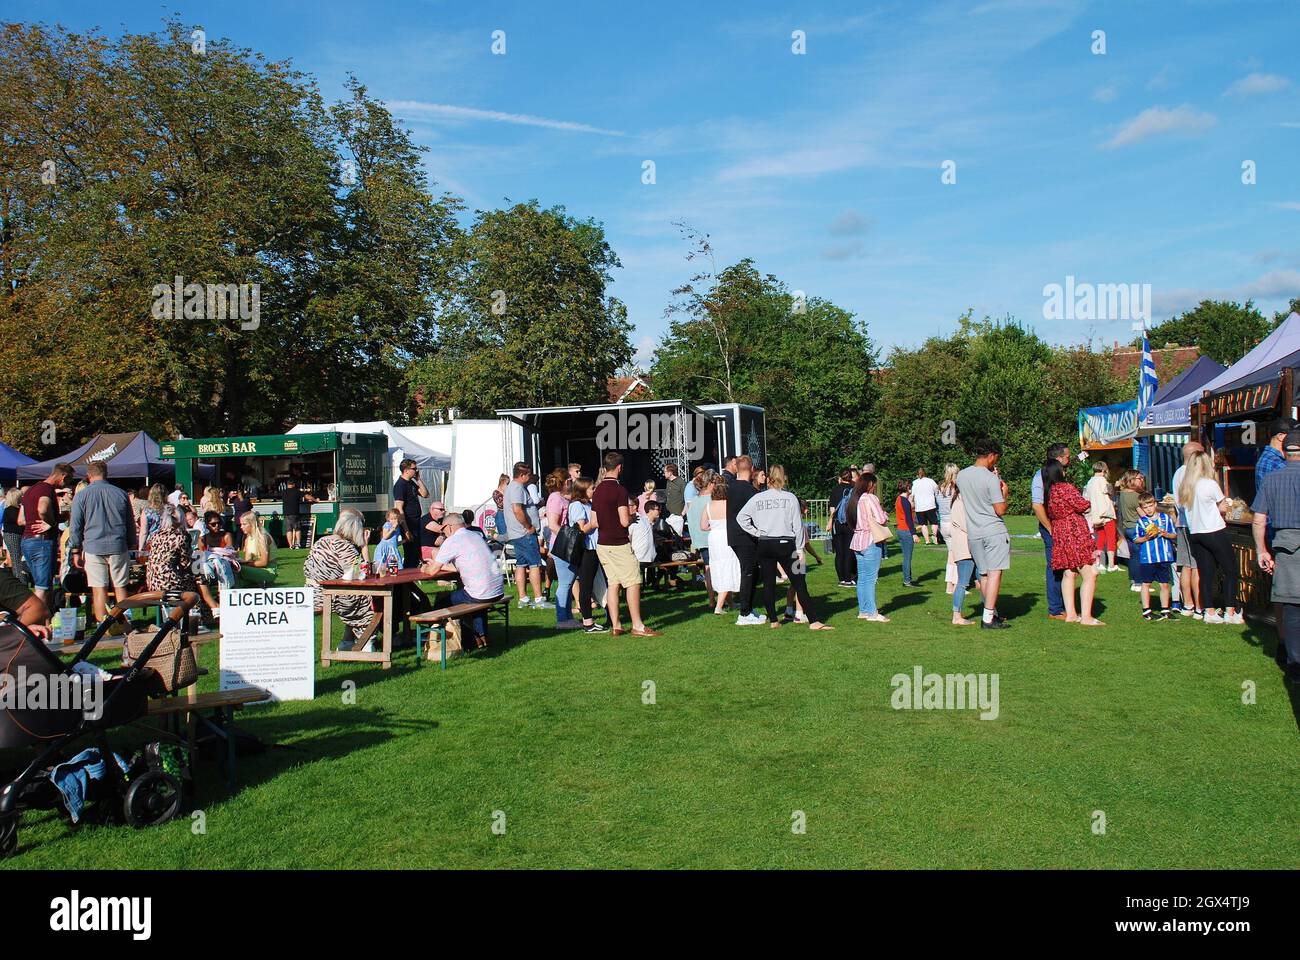 People queue at a food stall during the annual Food and Drink Festival at Tenterden in Kent, England on September 11, 2021. The event was first held in 2017. Stock Photo